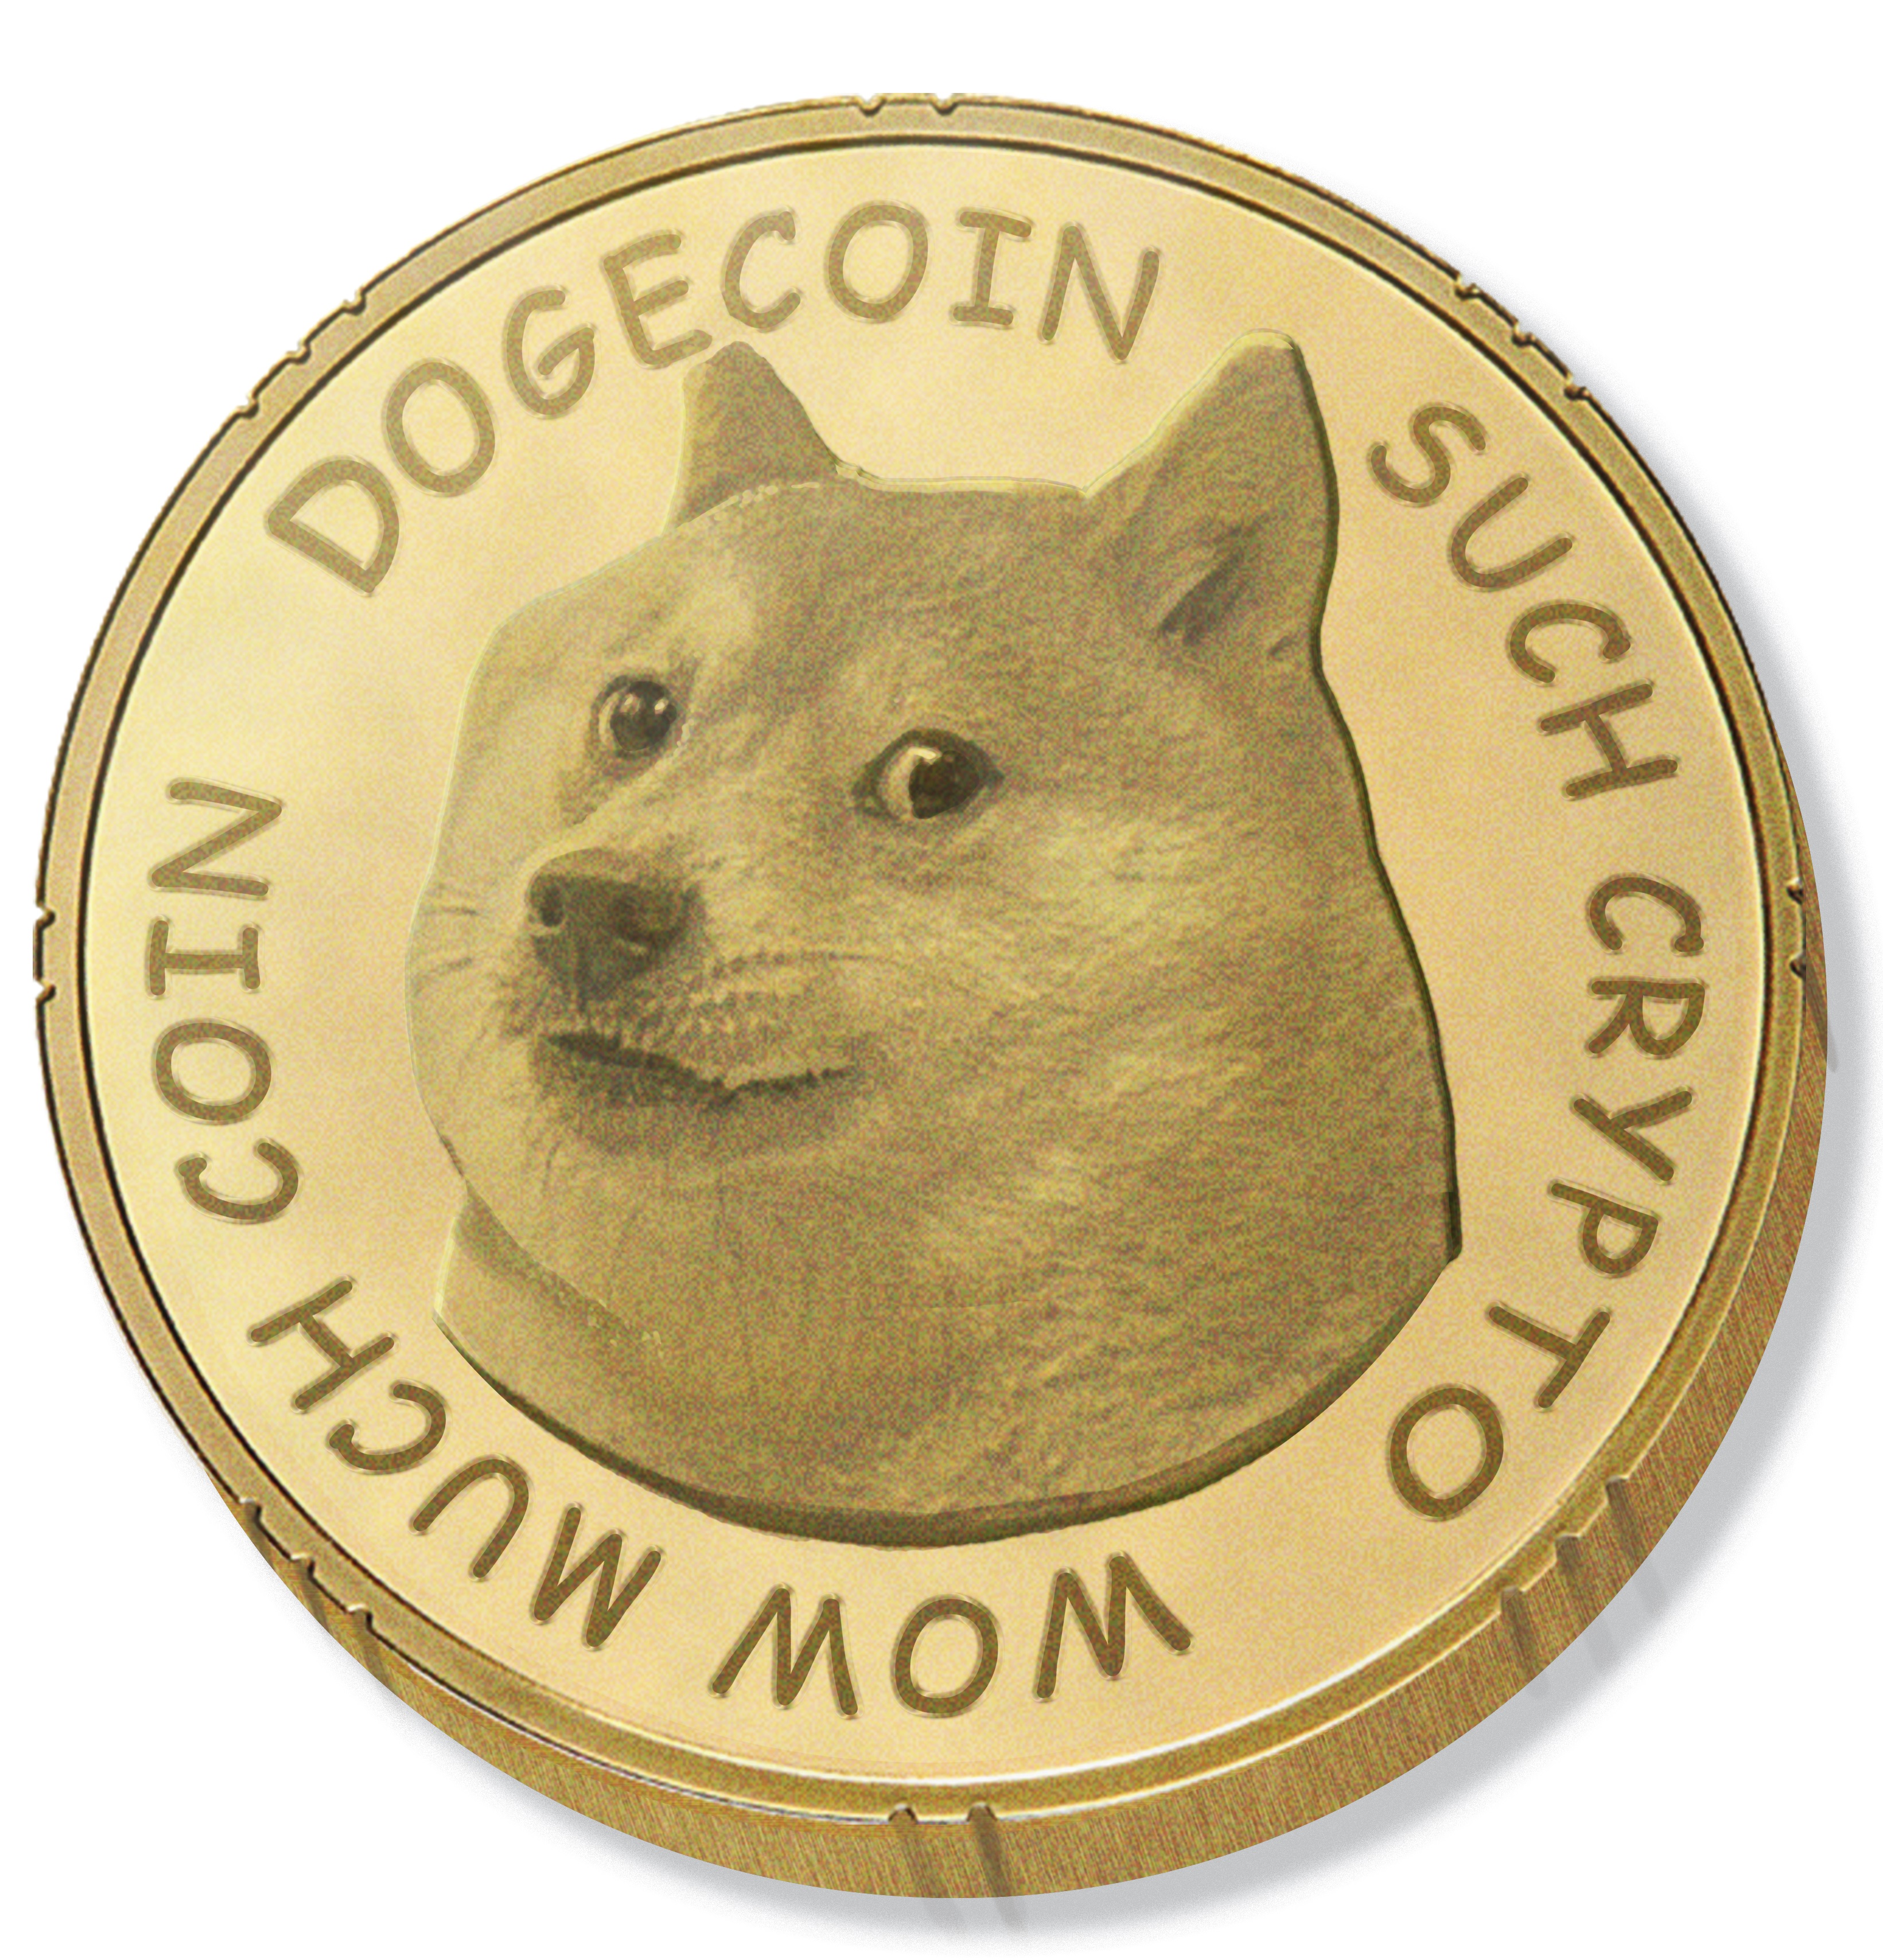 Dogecoin ($DOGE) is Making Waves in Emerging Markets